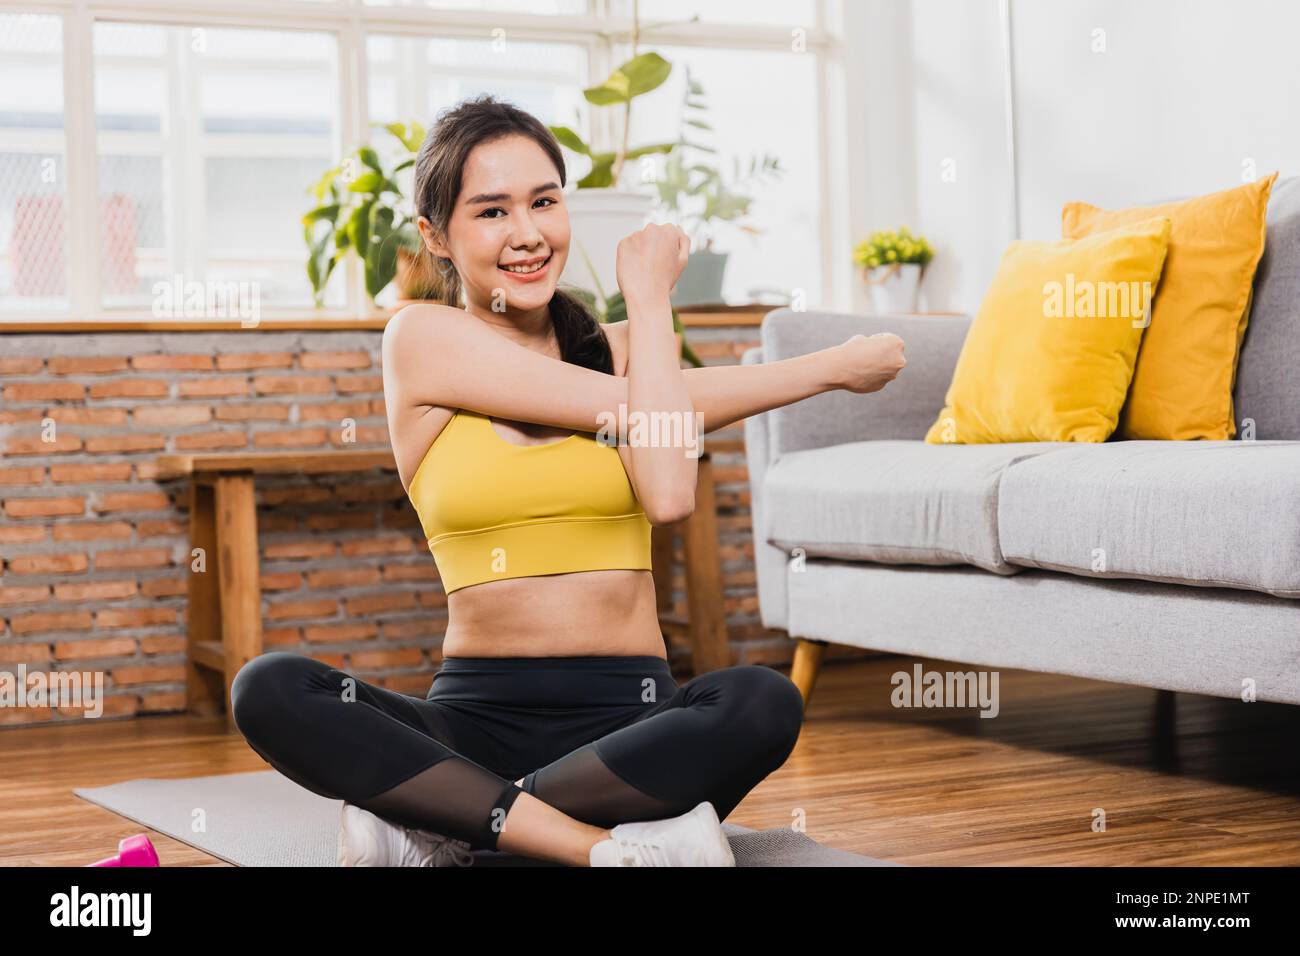 Sporty young woman, Asian female exercising with her weights in the living room Stock Photo